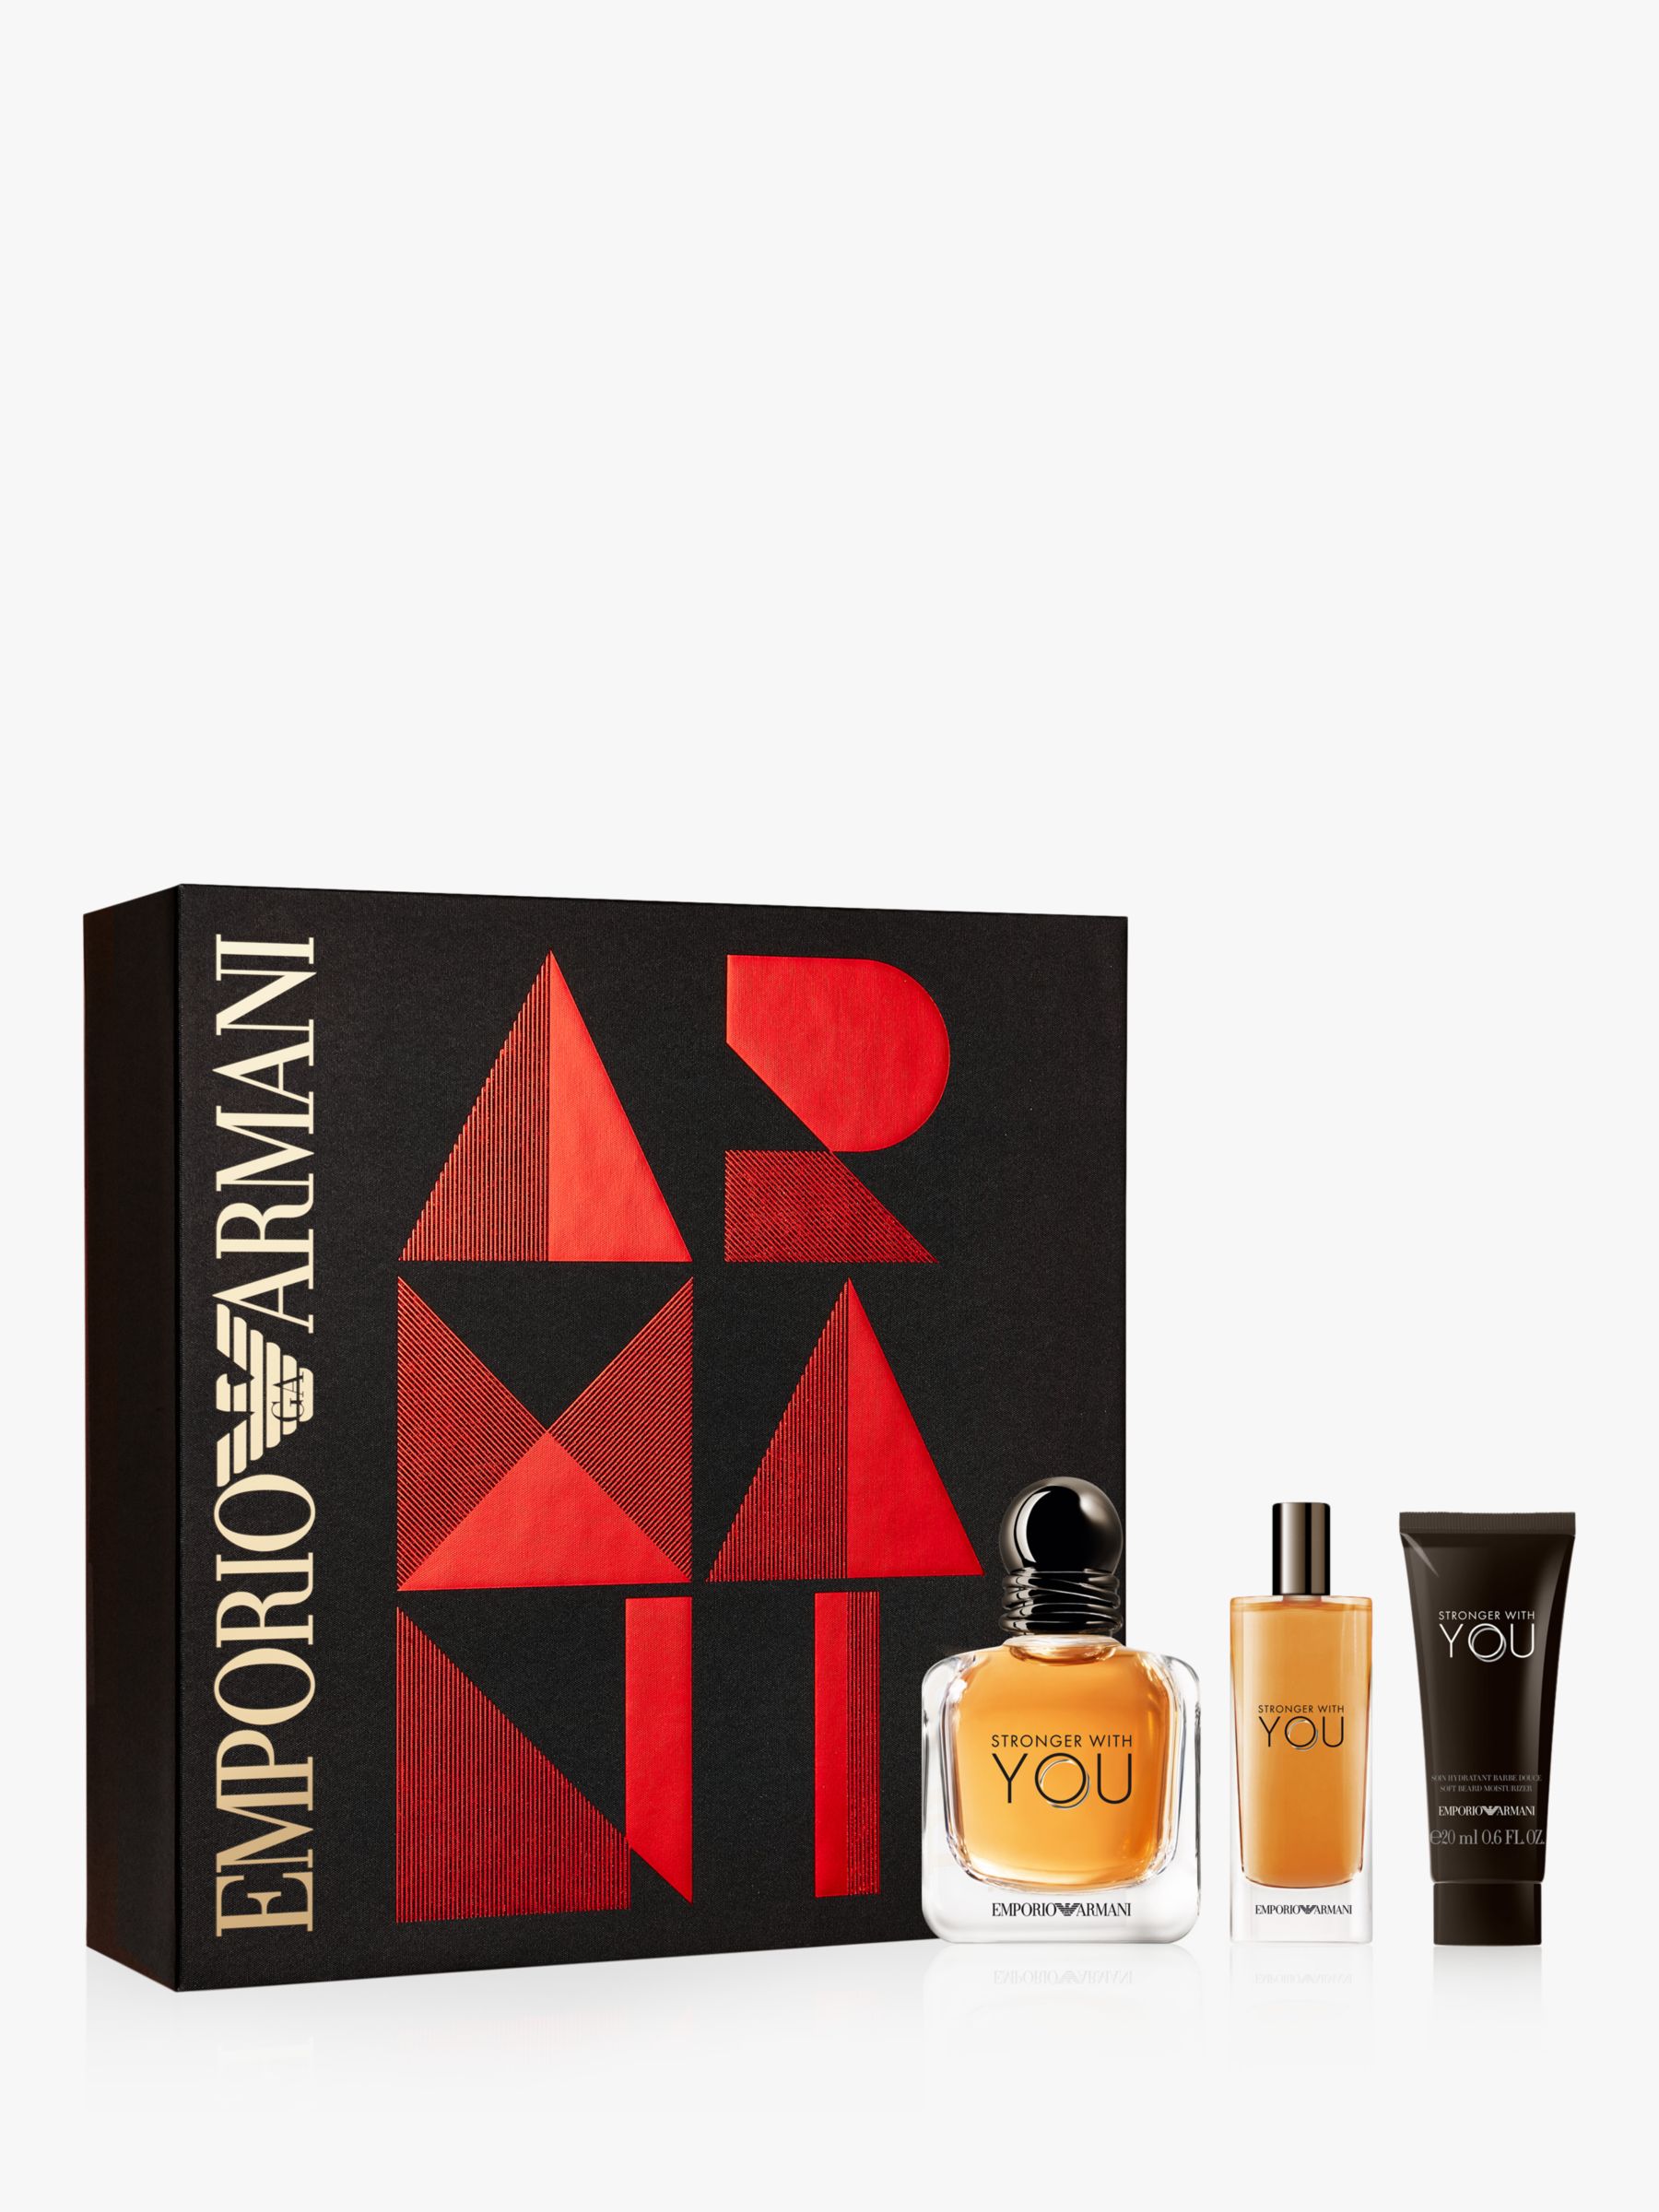 armani stronger with you gift set boots